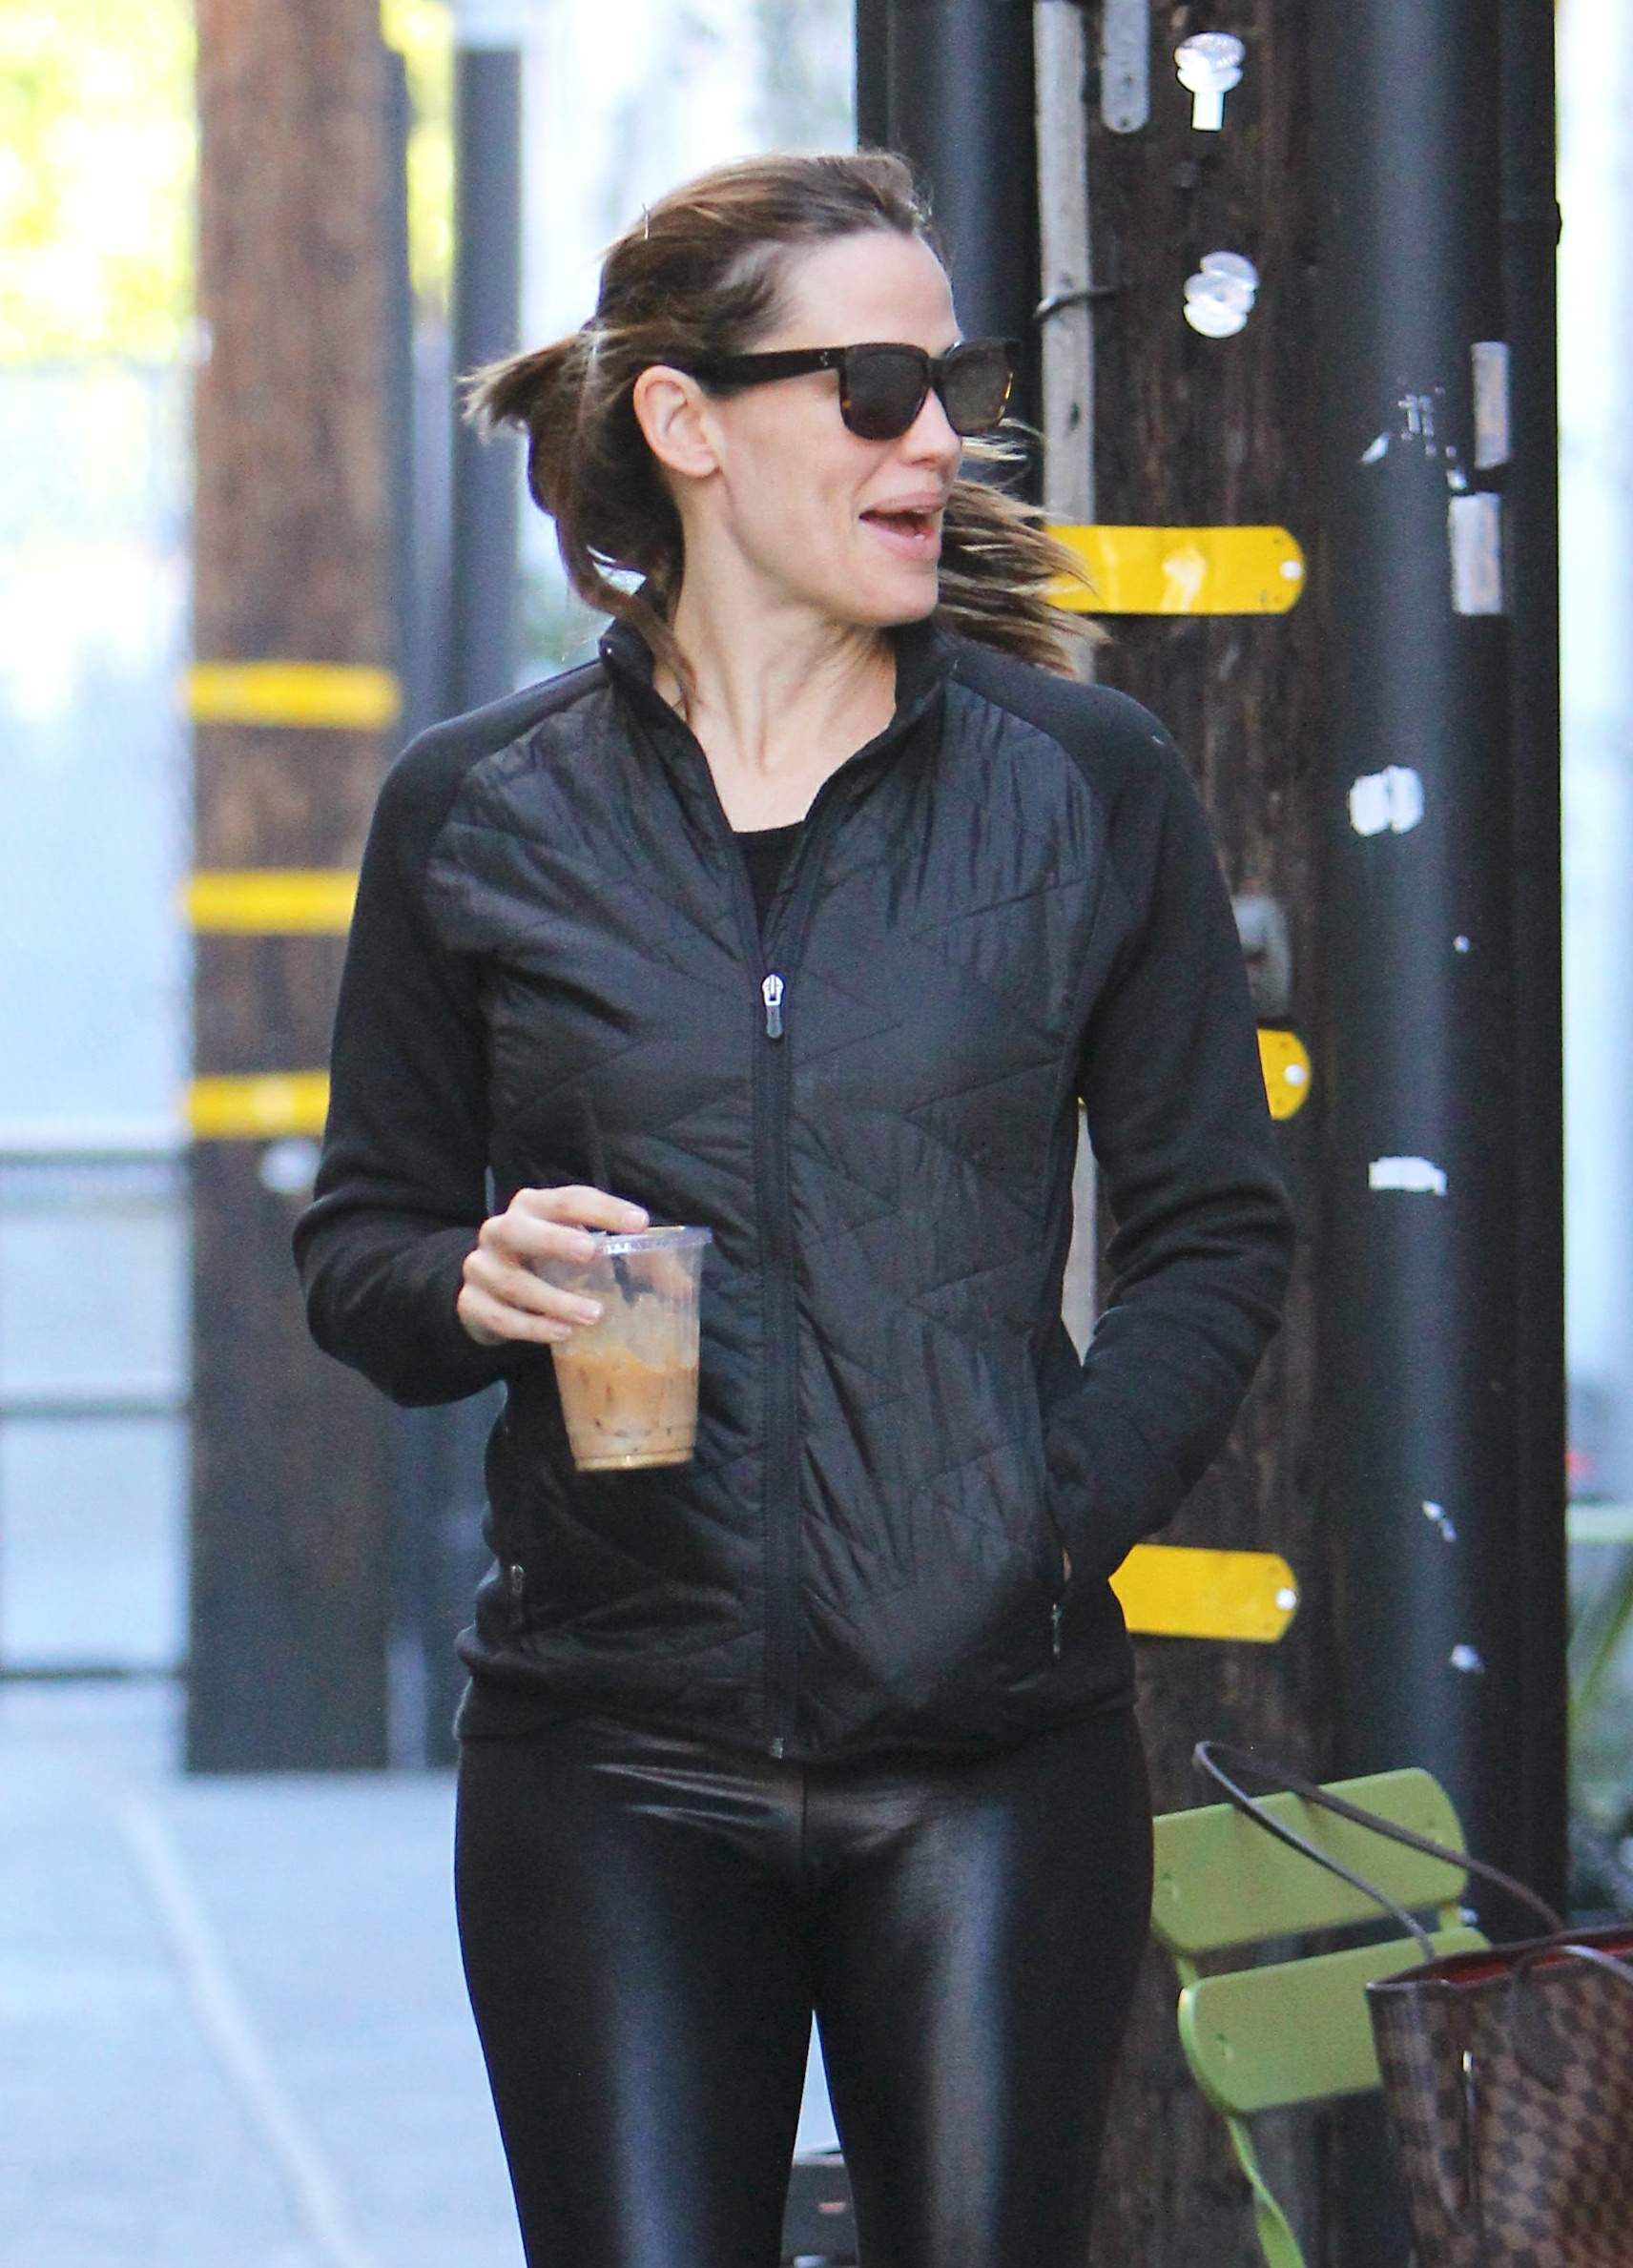 Jennifer Garner out and about in Brentwood